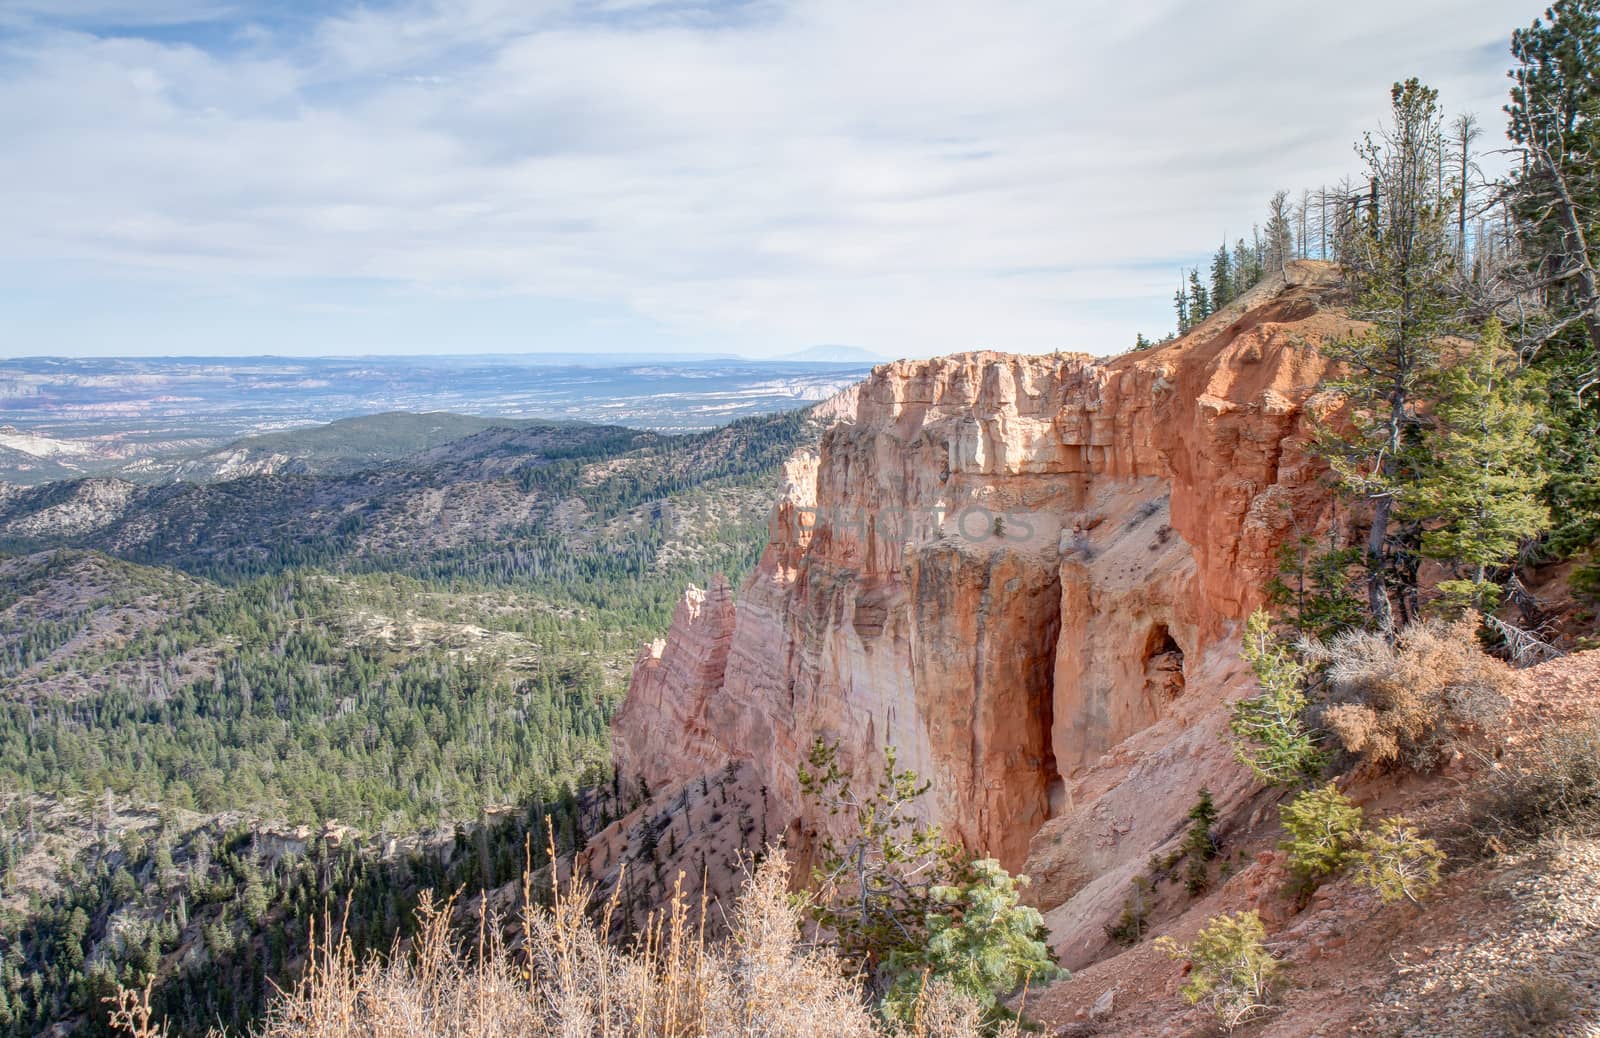 Bryce Canyon National Park consists of a series of horseshoe-shaped amphitheaters carved from the eastern edge of the Paunsaugunt Plateau. This particular location is Black Birch Canyon.